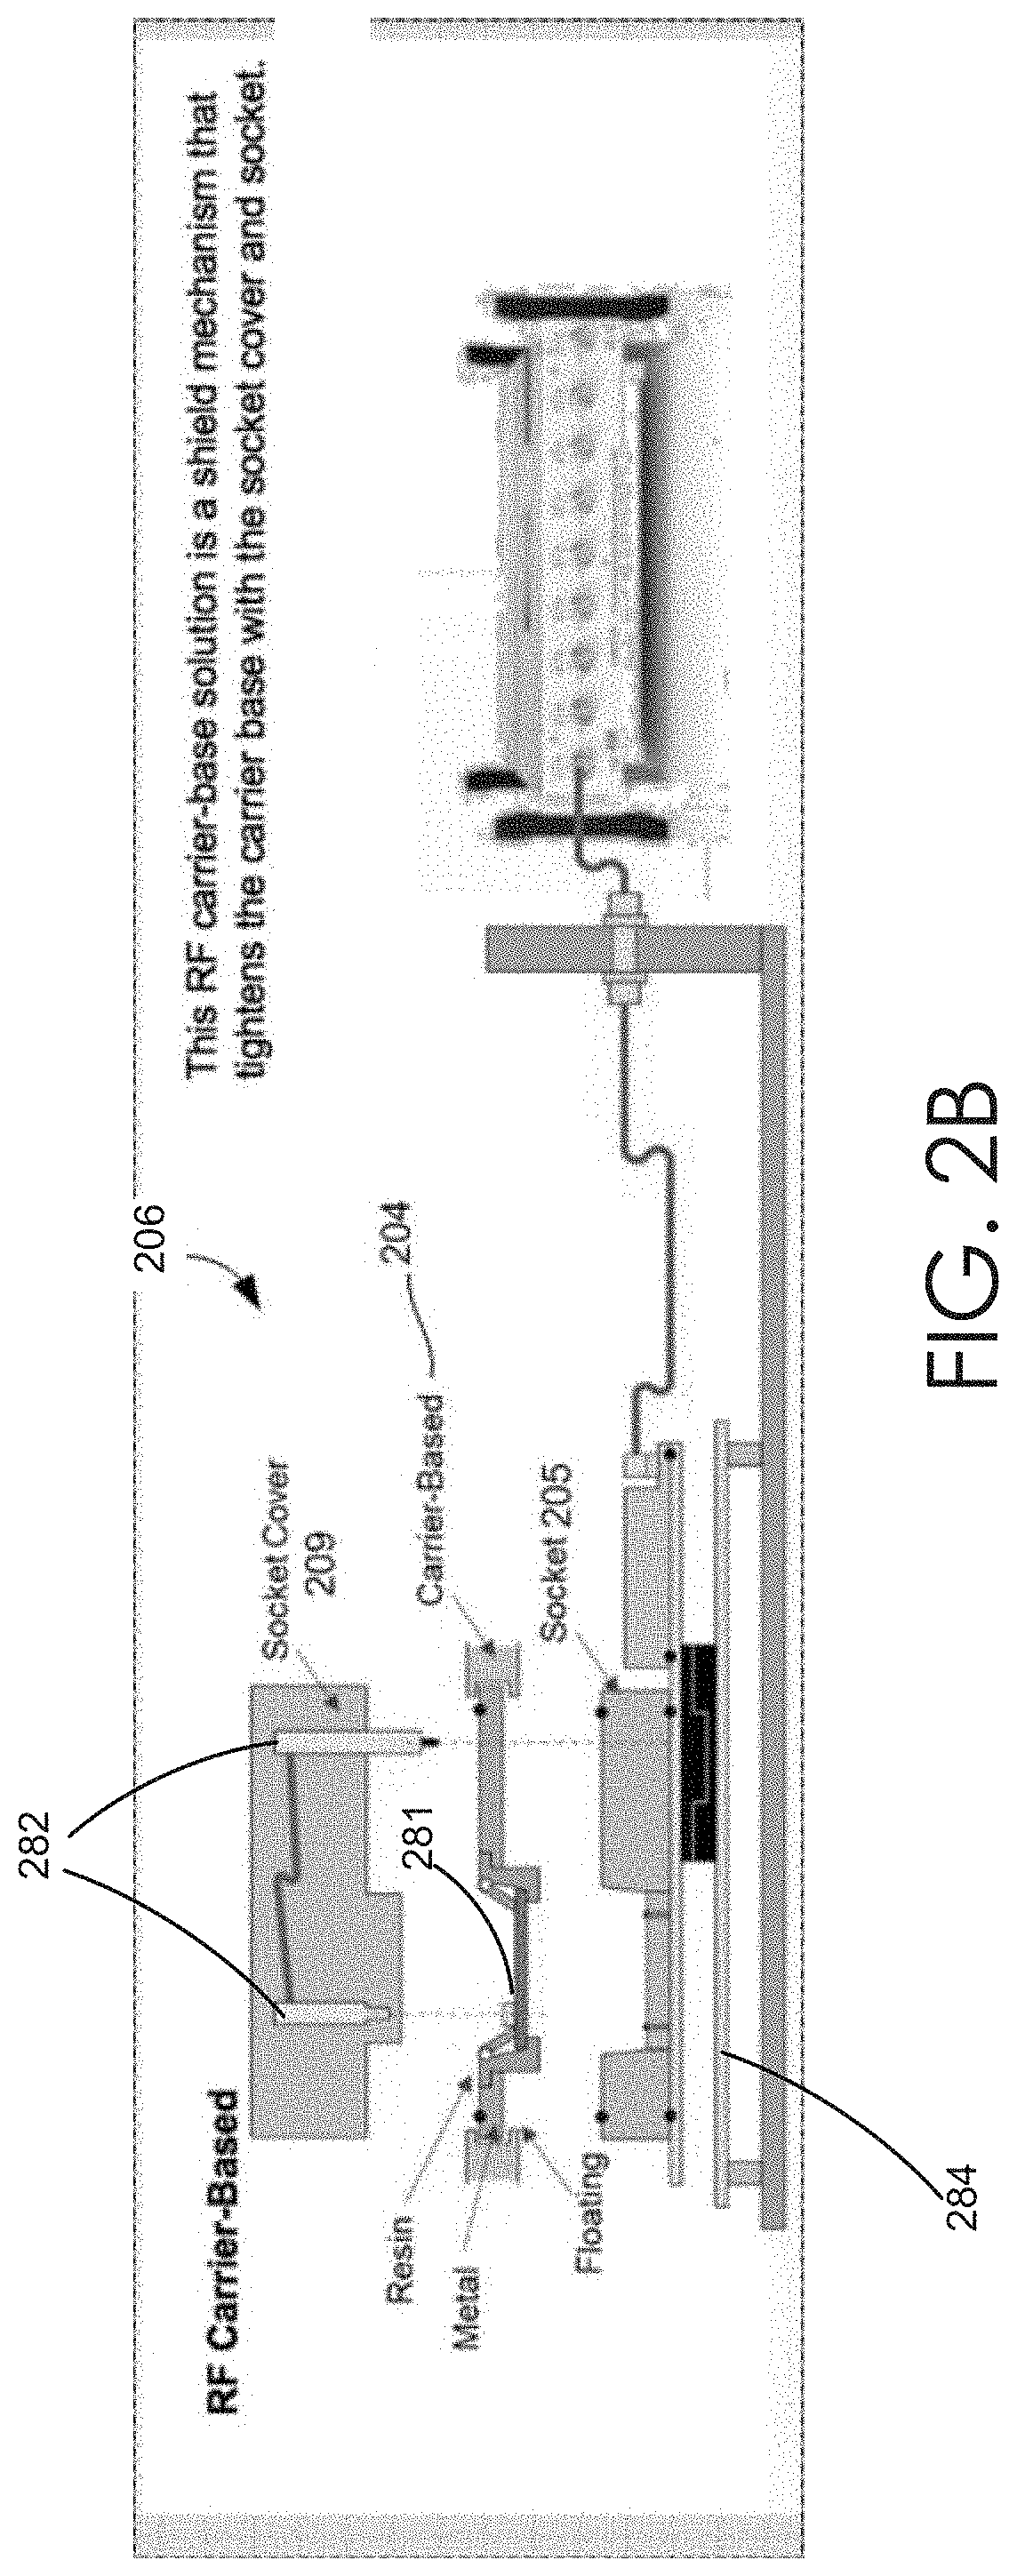 Passive carrier-based device delivery for slot-based high-volume semiconductor test system